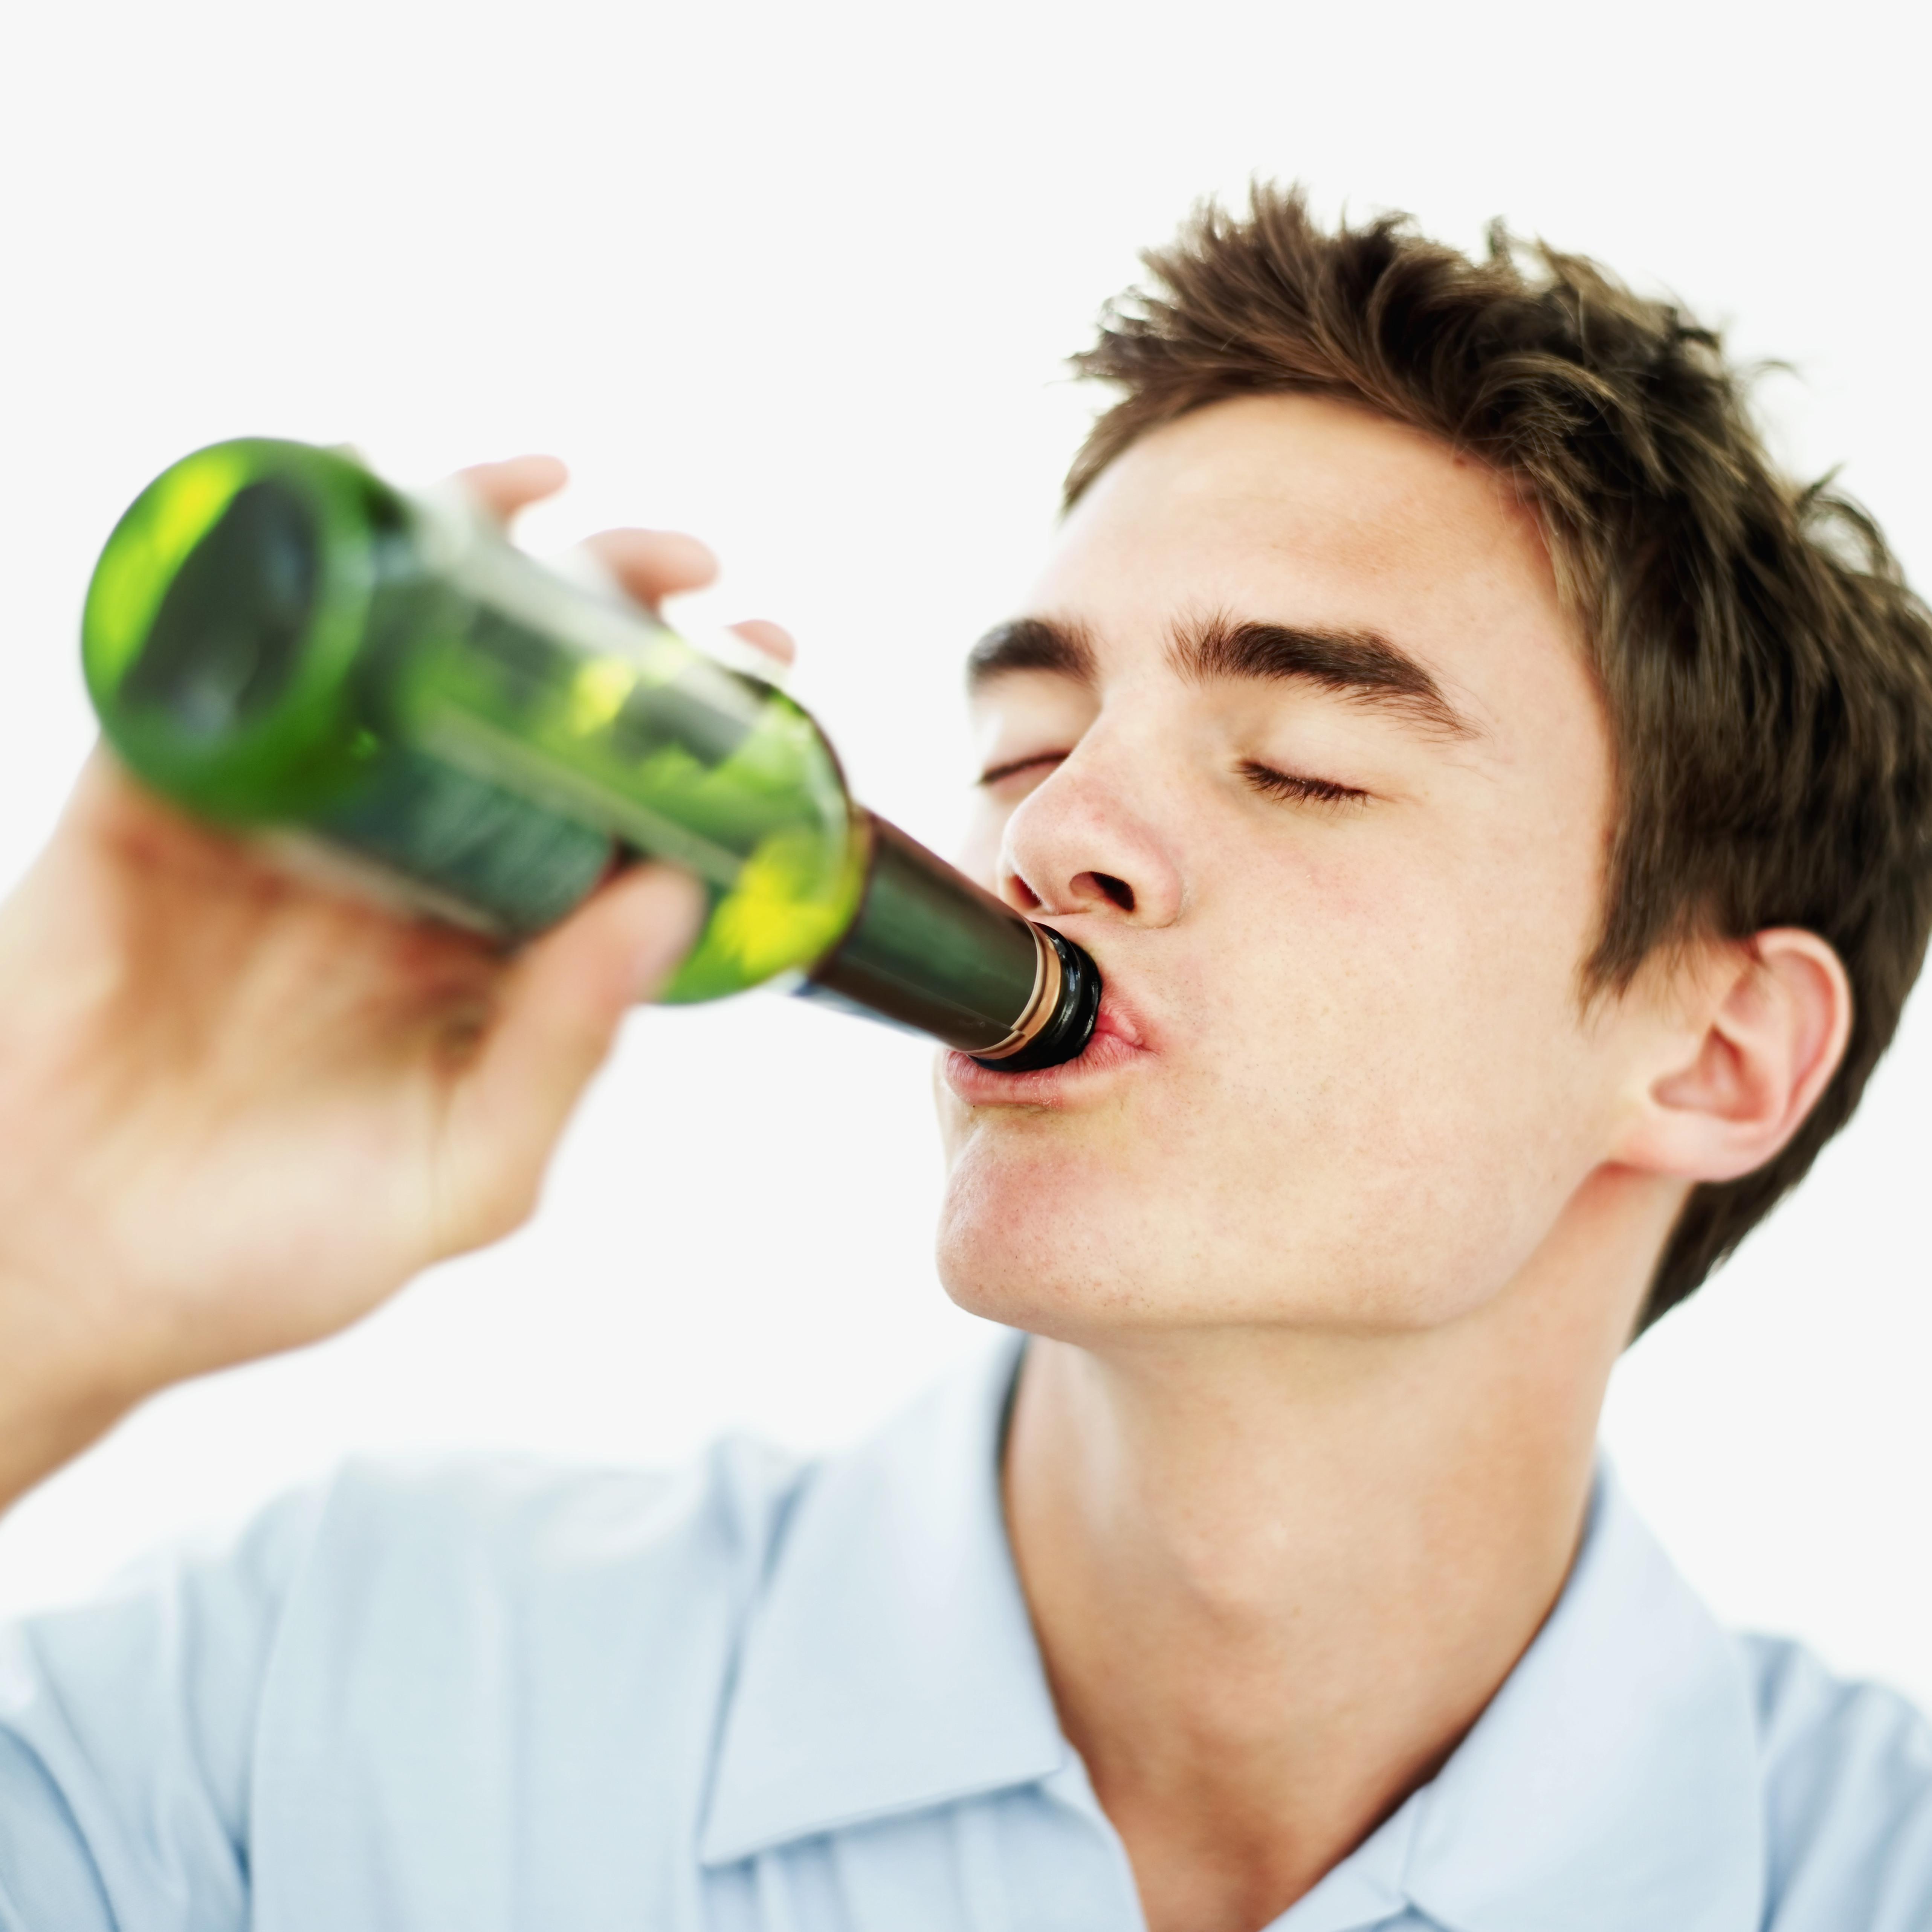 close-up of a teenage boy drinking a bottle of beer